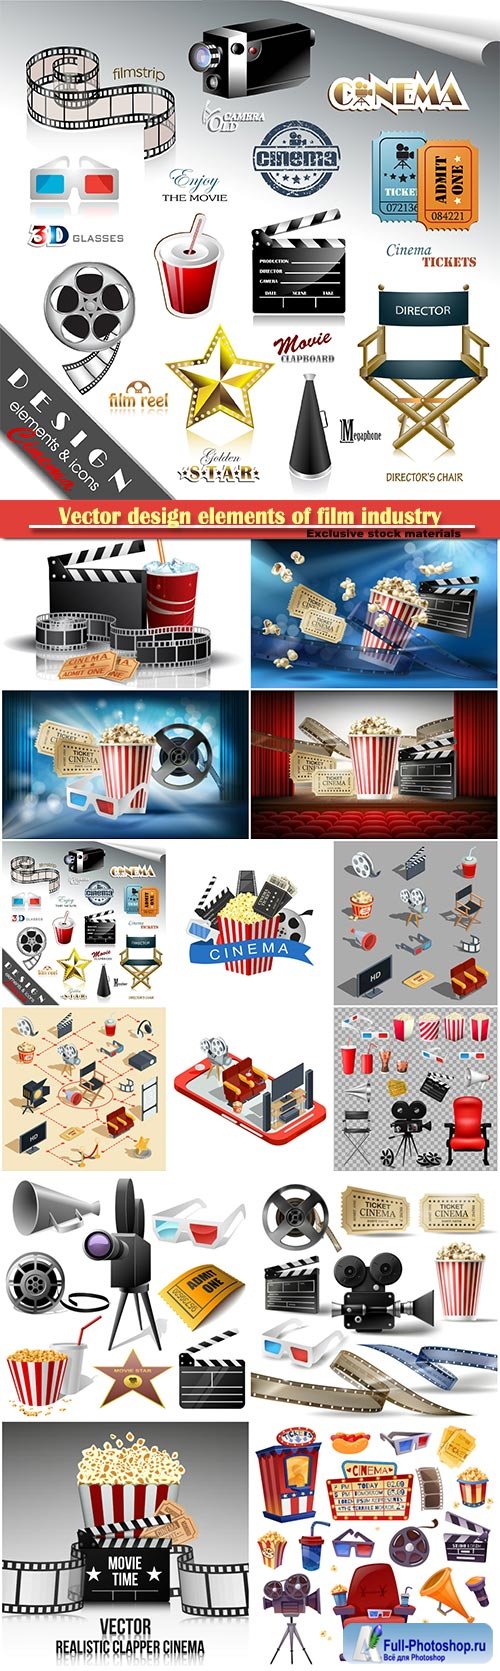 Vector design elements of film industry, popcorn, reel, tape, glasses, camcorder, movie tickets and clapper board